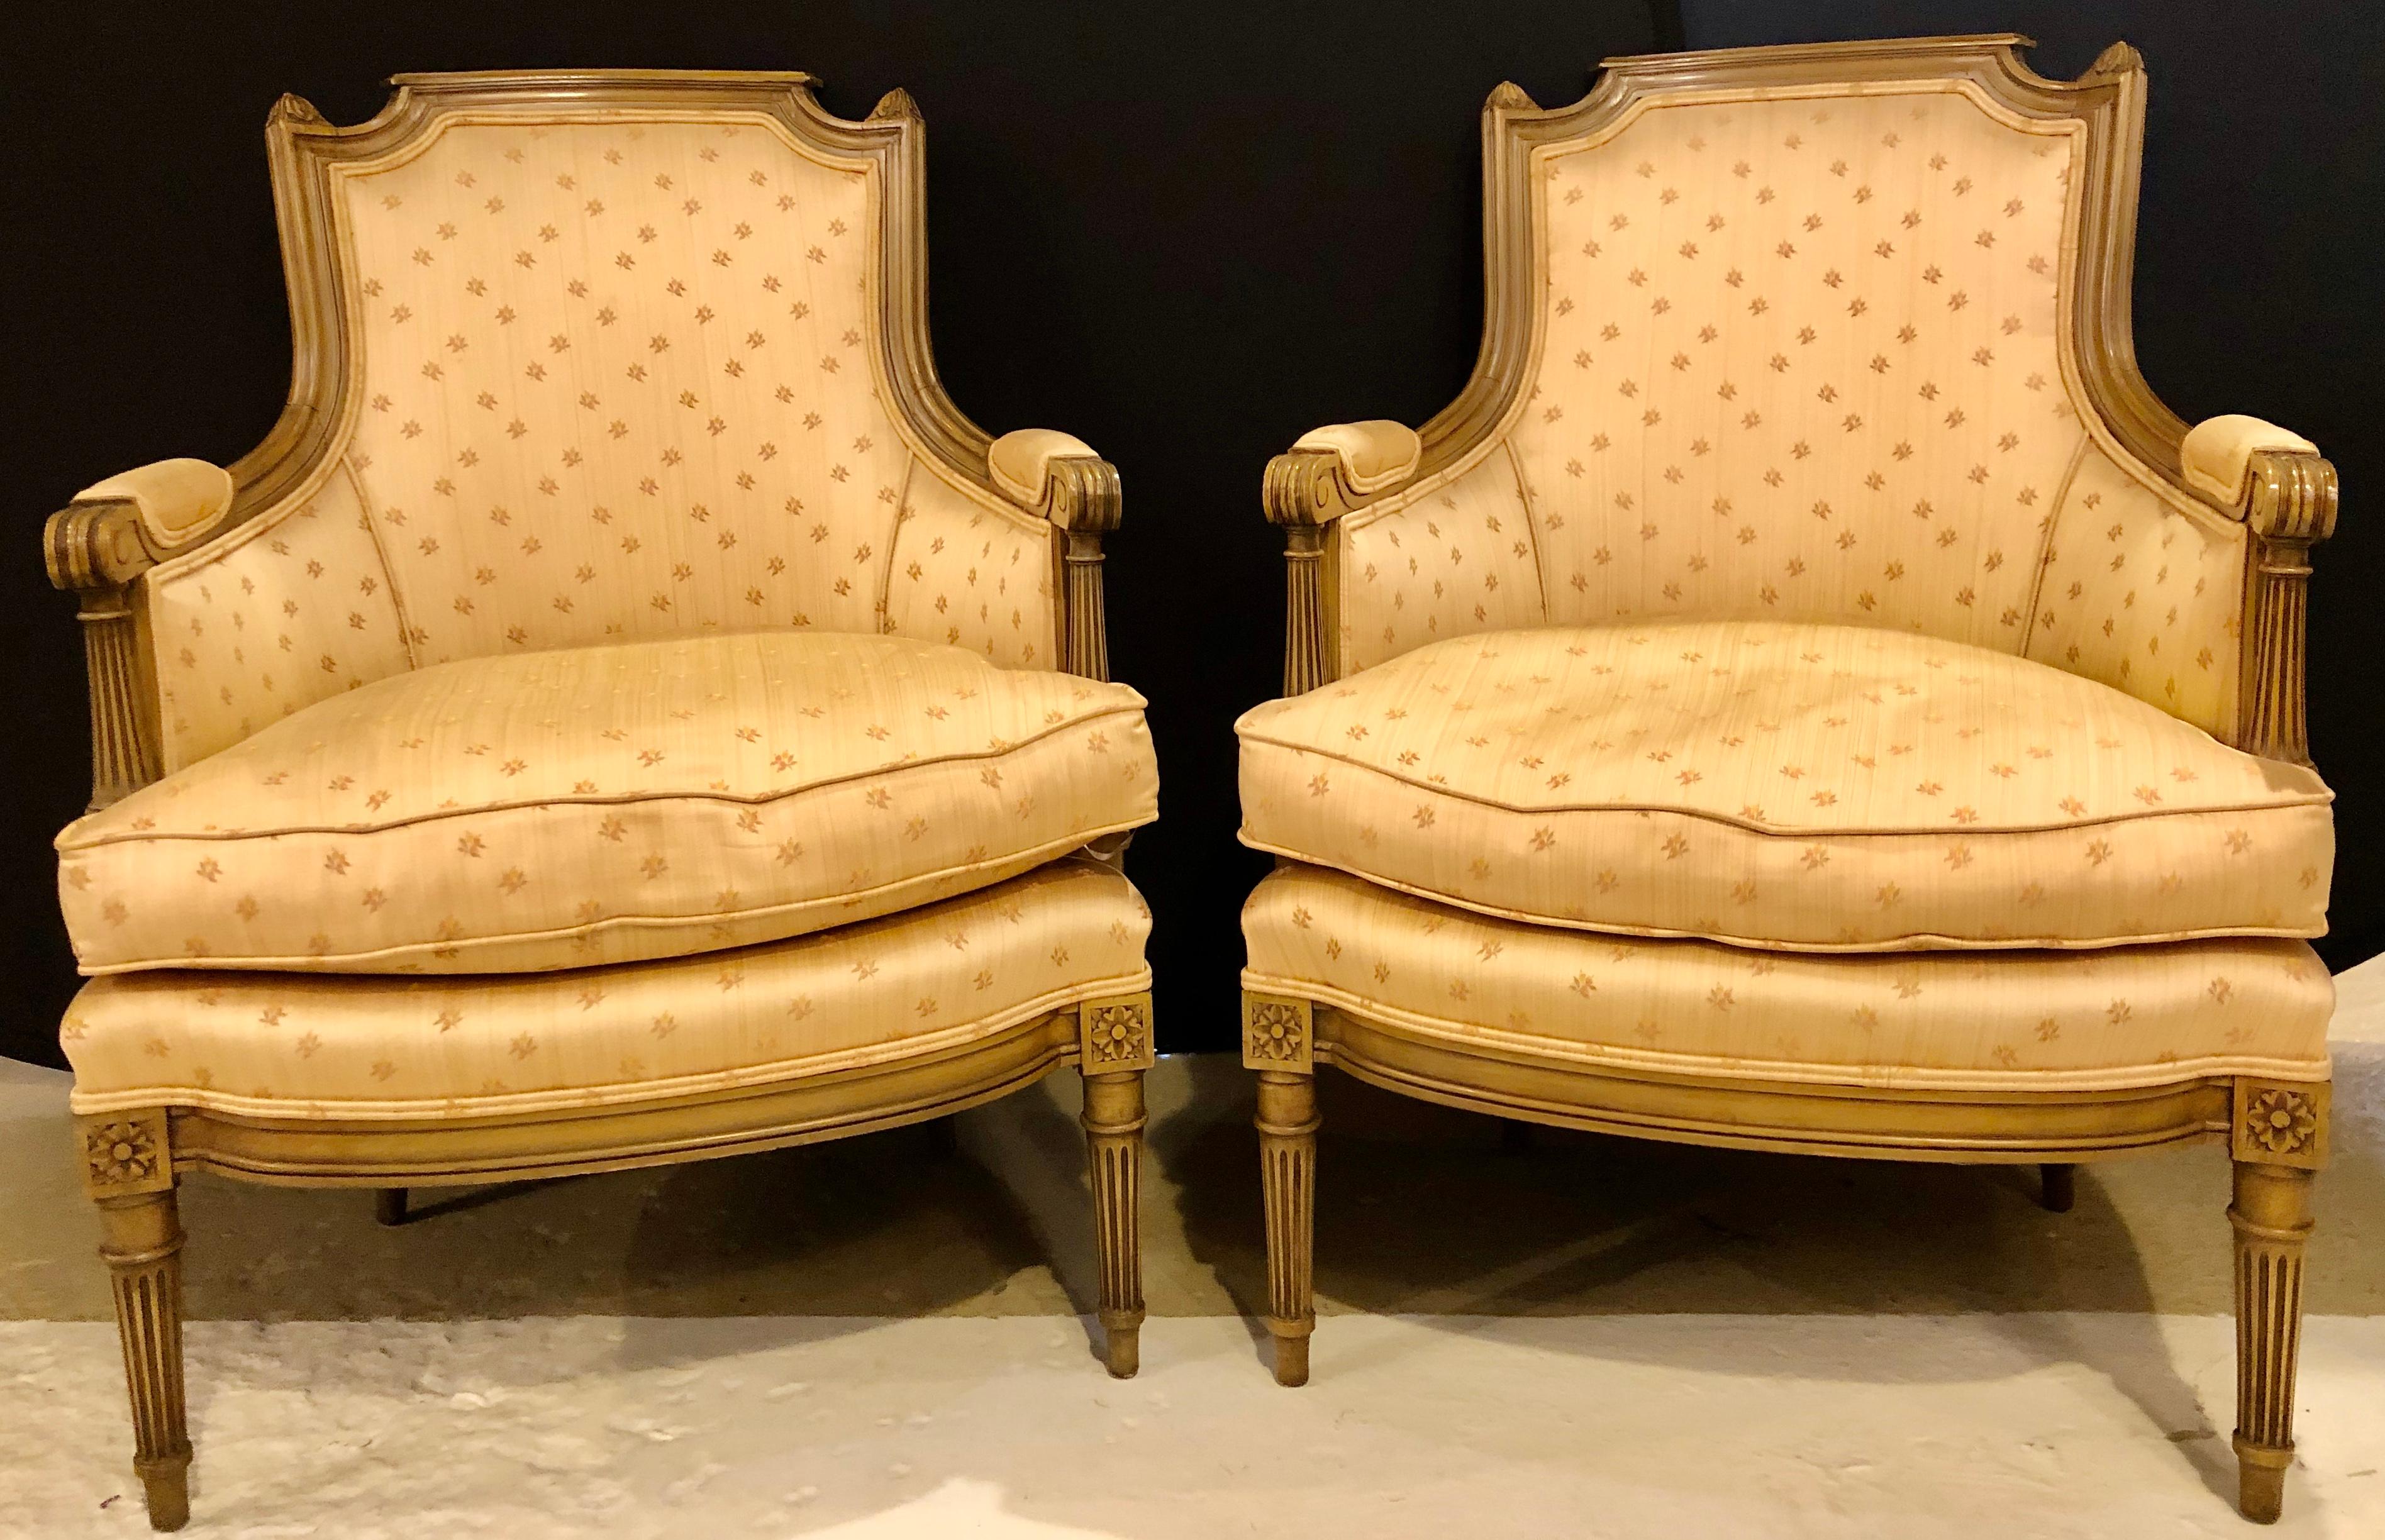 Pair of Louis XVI style bergère chairs. Armchairs in the Maison Jansen style from France in a nice clean Scalamandre fabric. These lovely bergère chairs are sure to add charm to any setting.